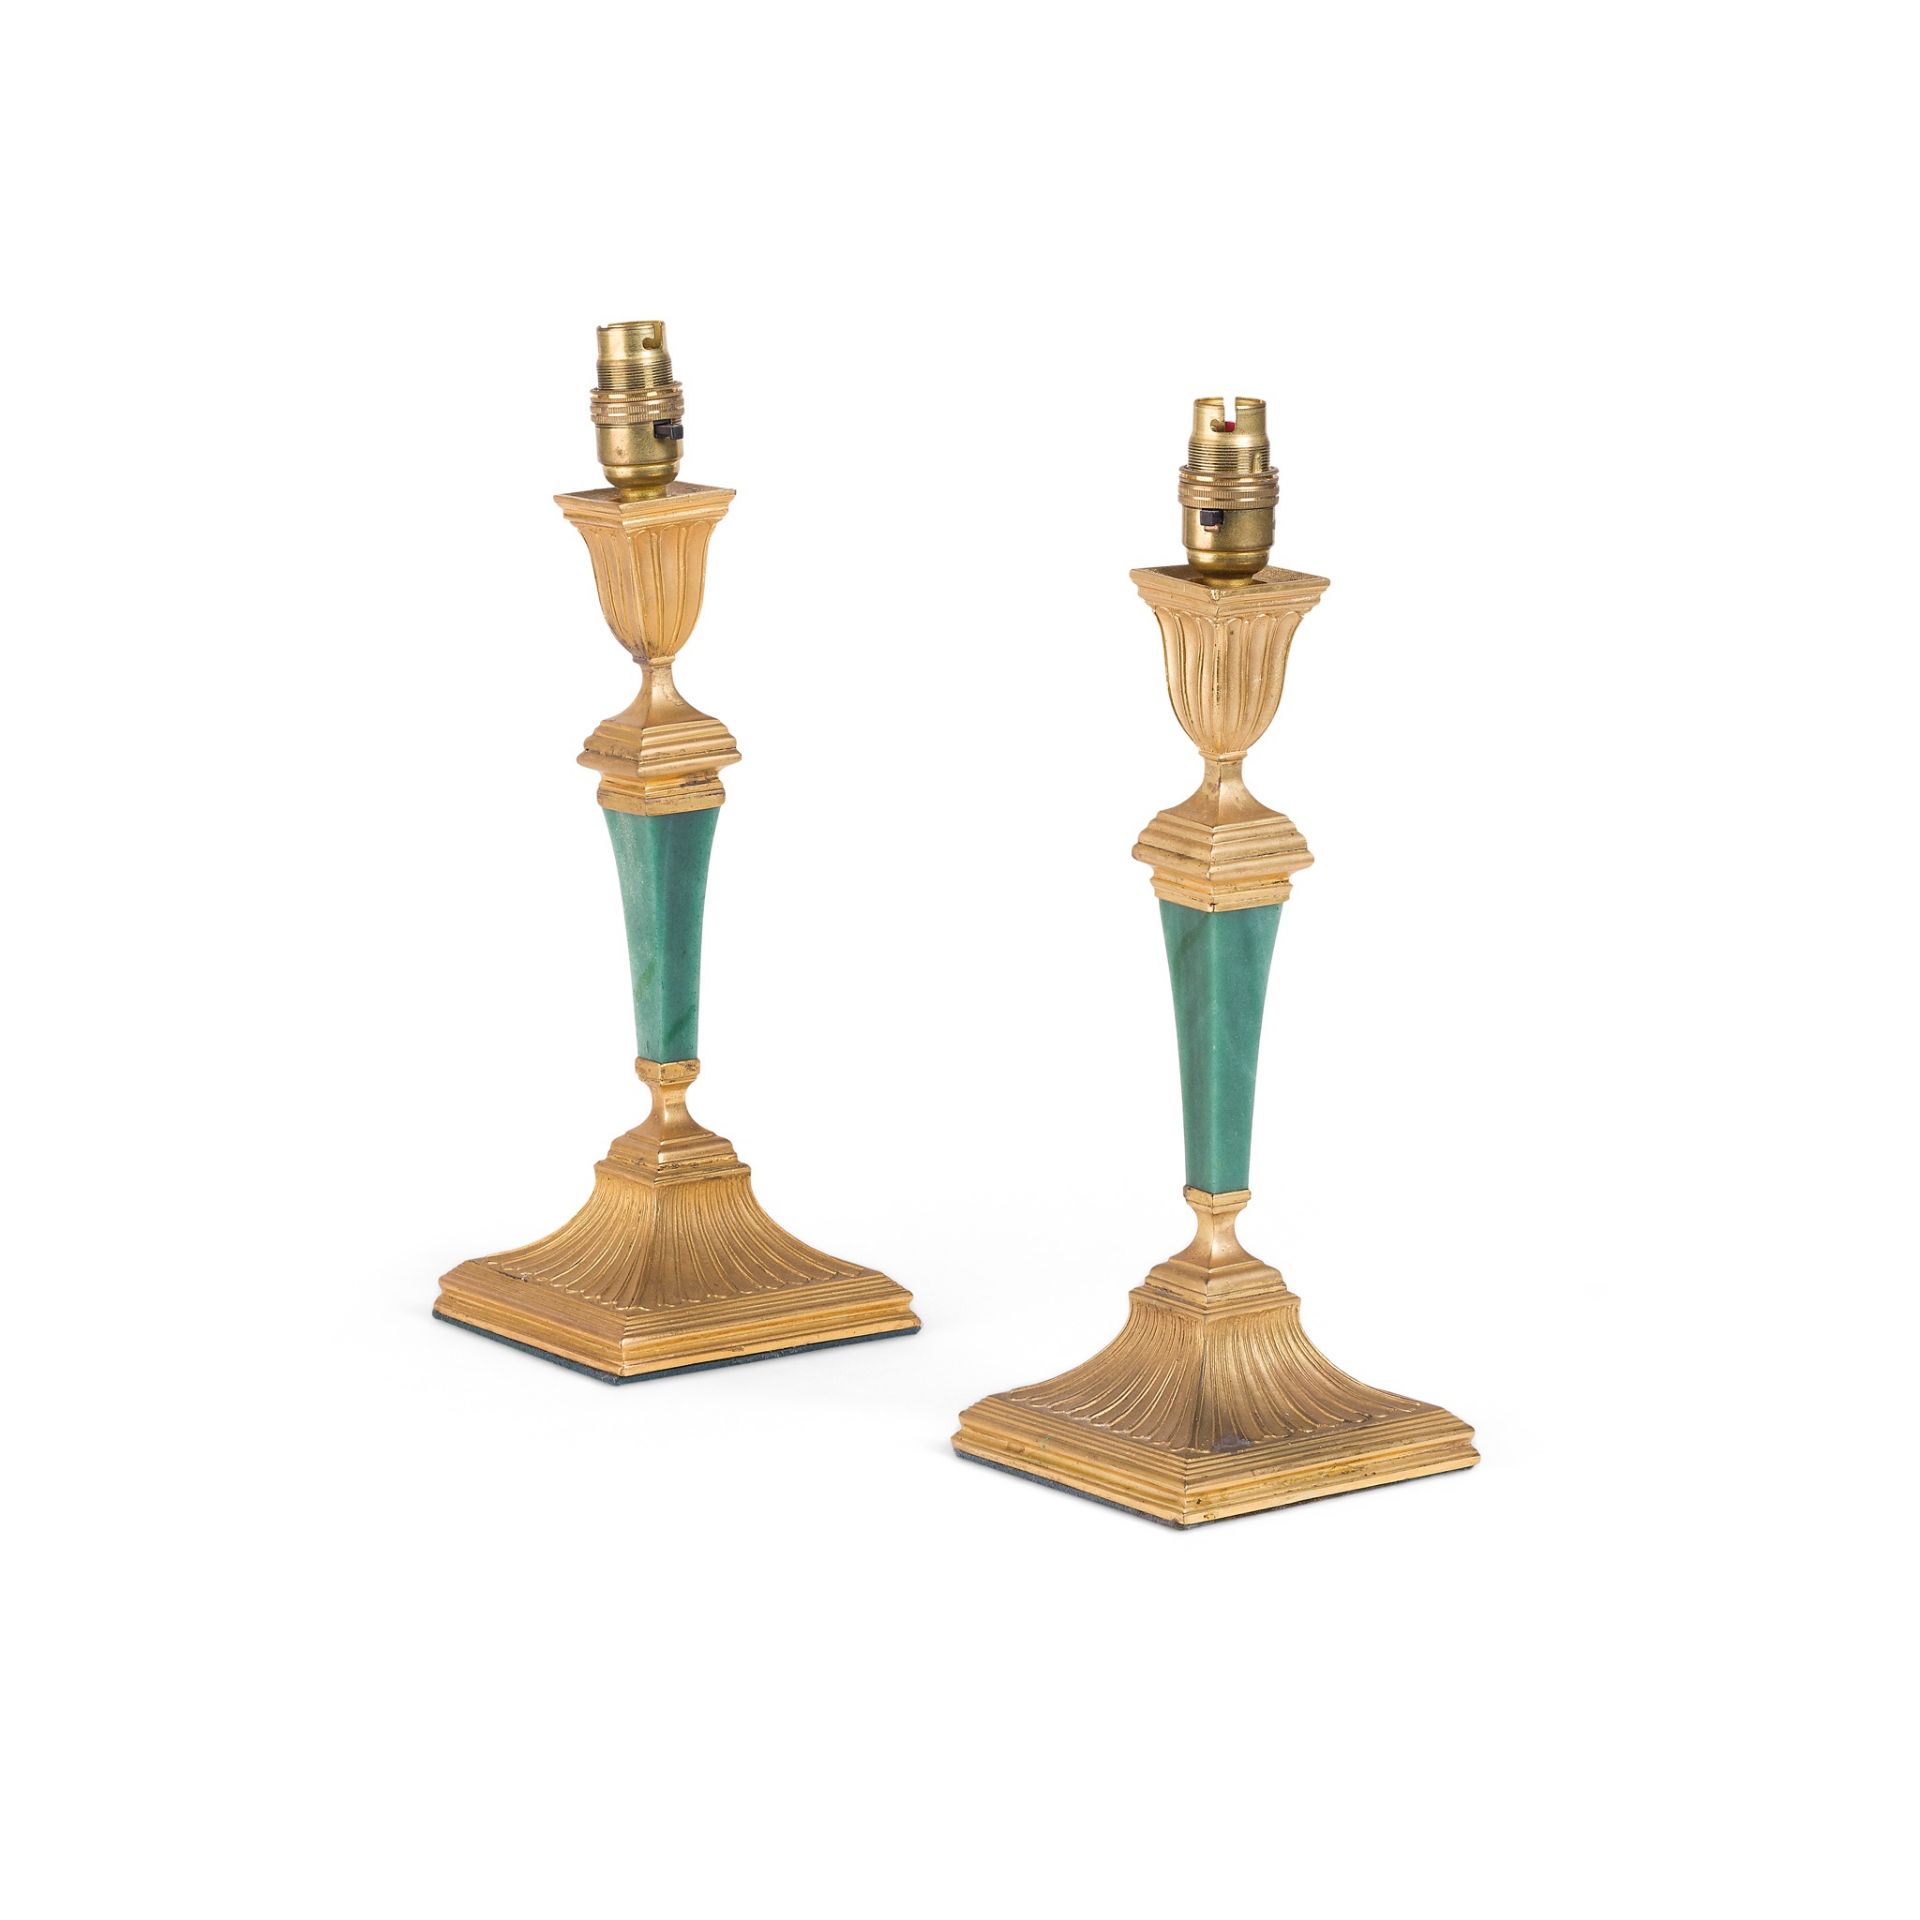 PAIR OF FRENCH GILT BRONZE AND GREEN HARDSTONE TABLE LAMPS 19TH CENTURY - Image 2 of 2